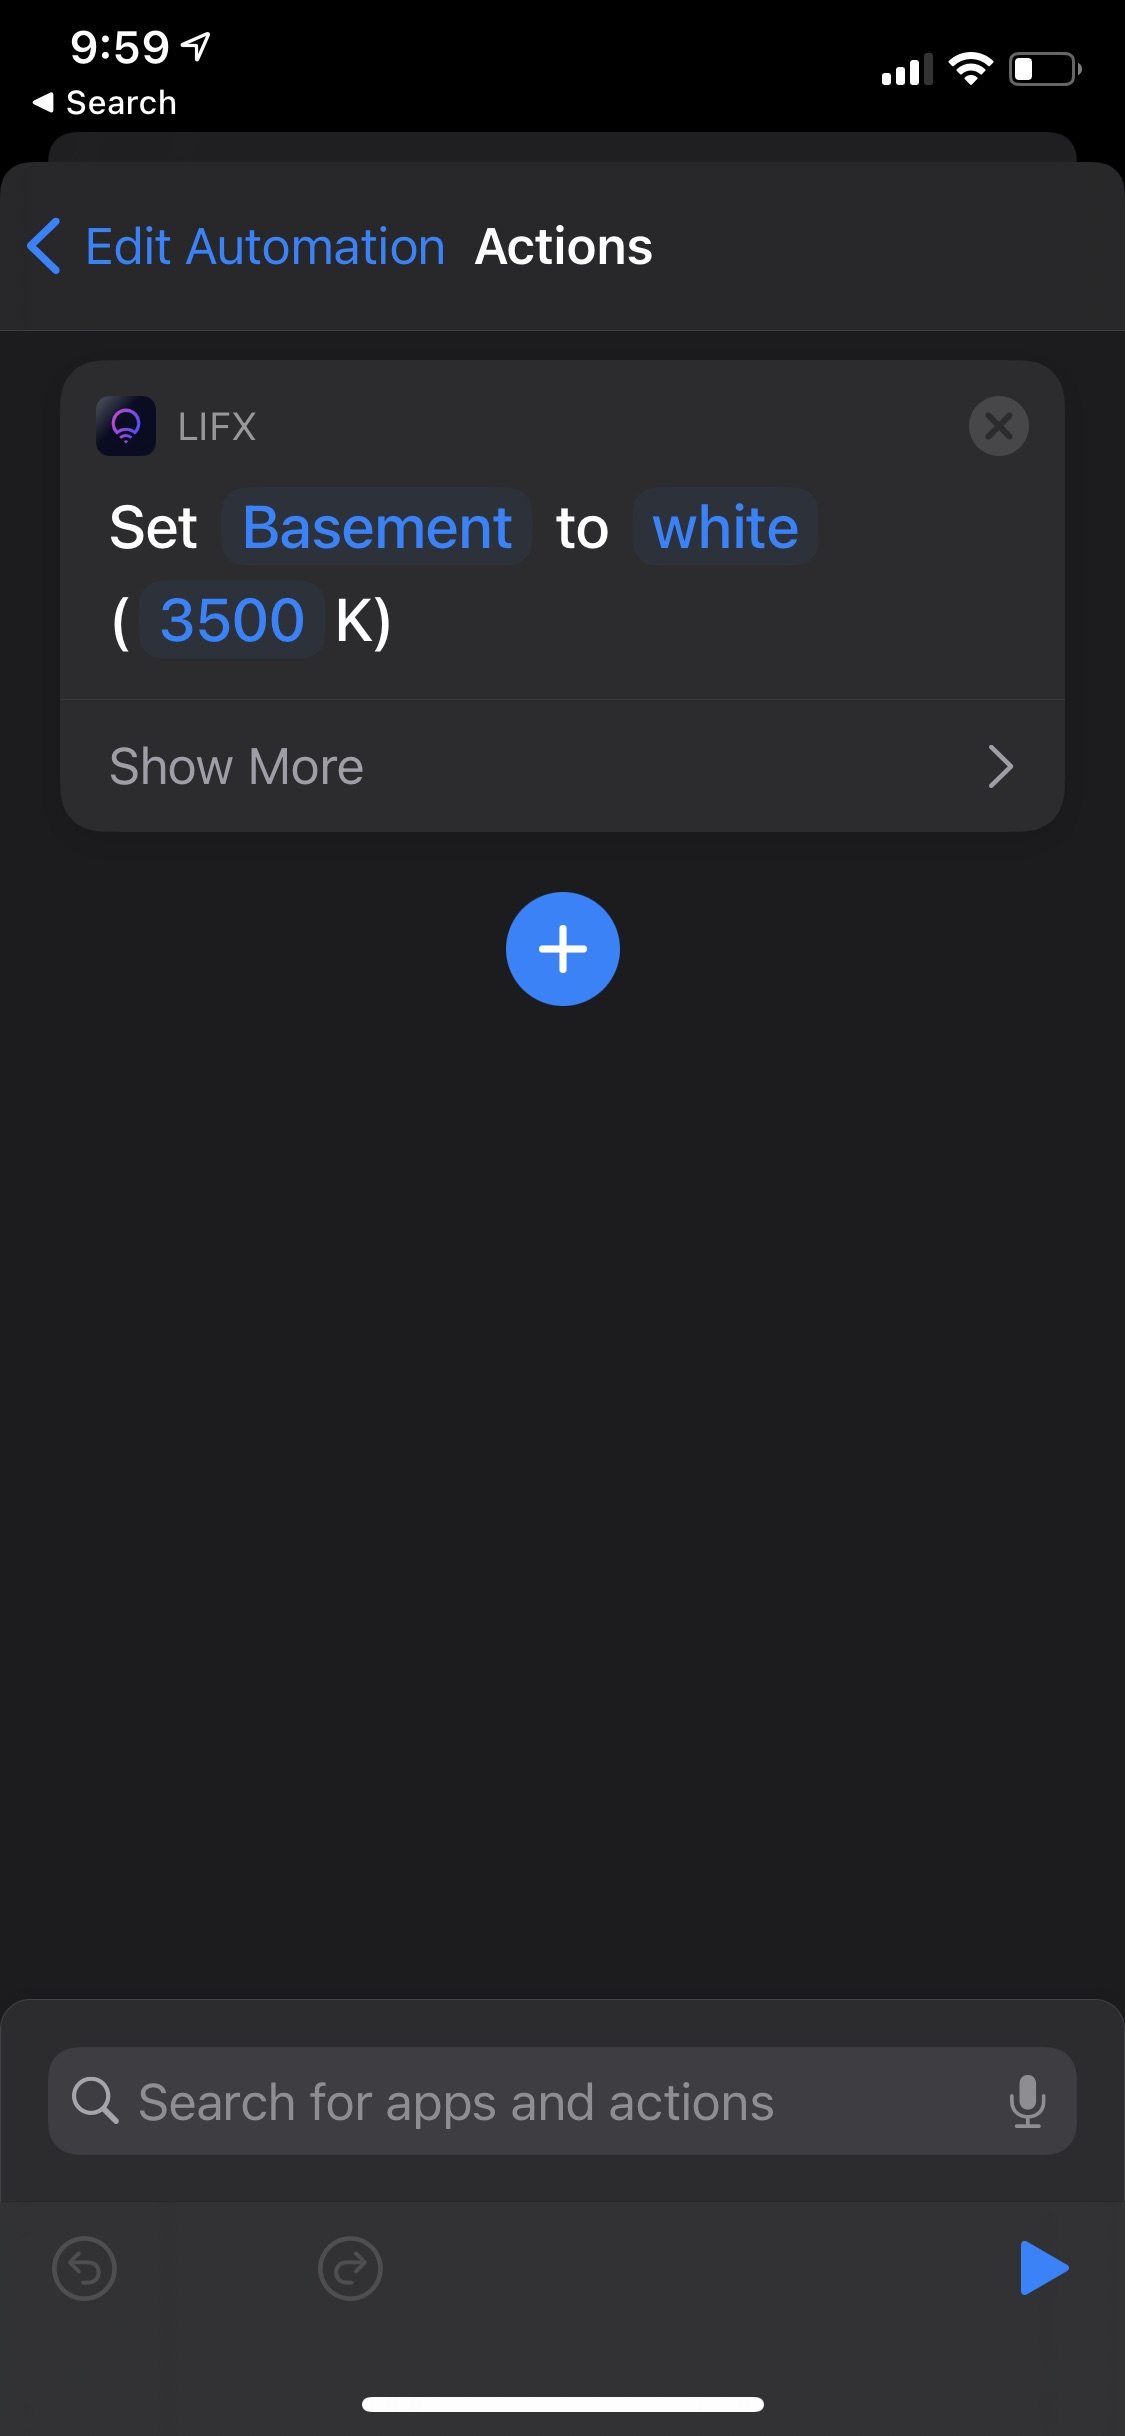 LIFX sunrise automation actions in the Shortcuts app